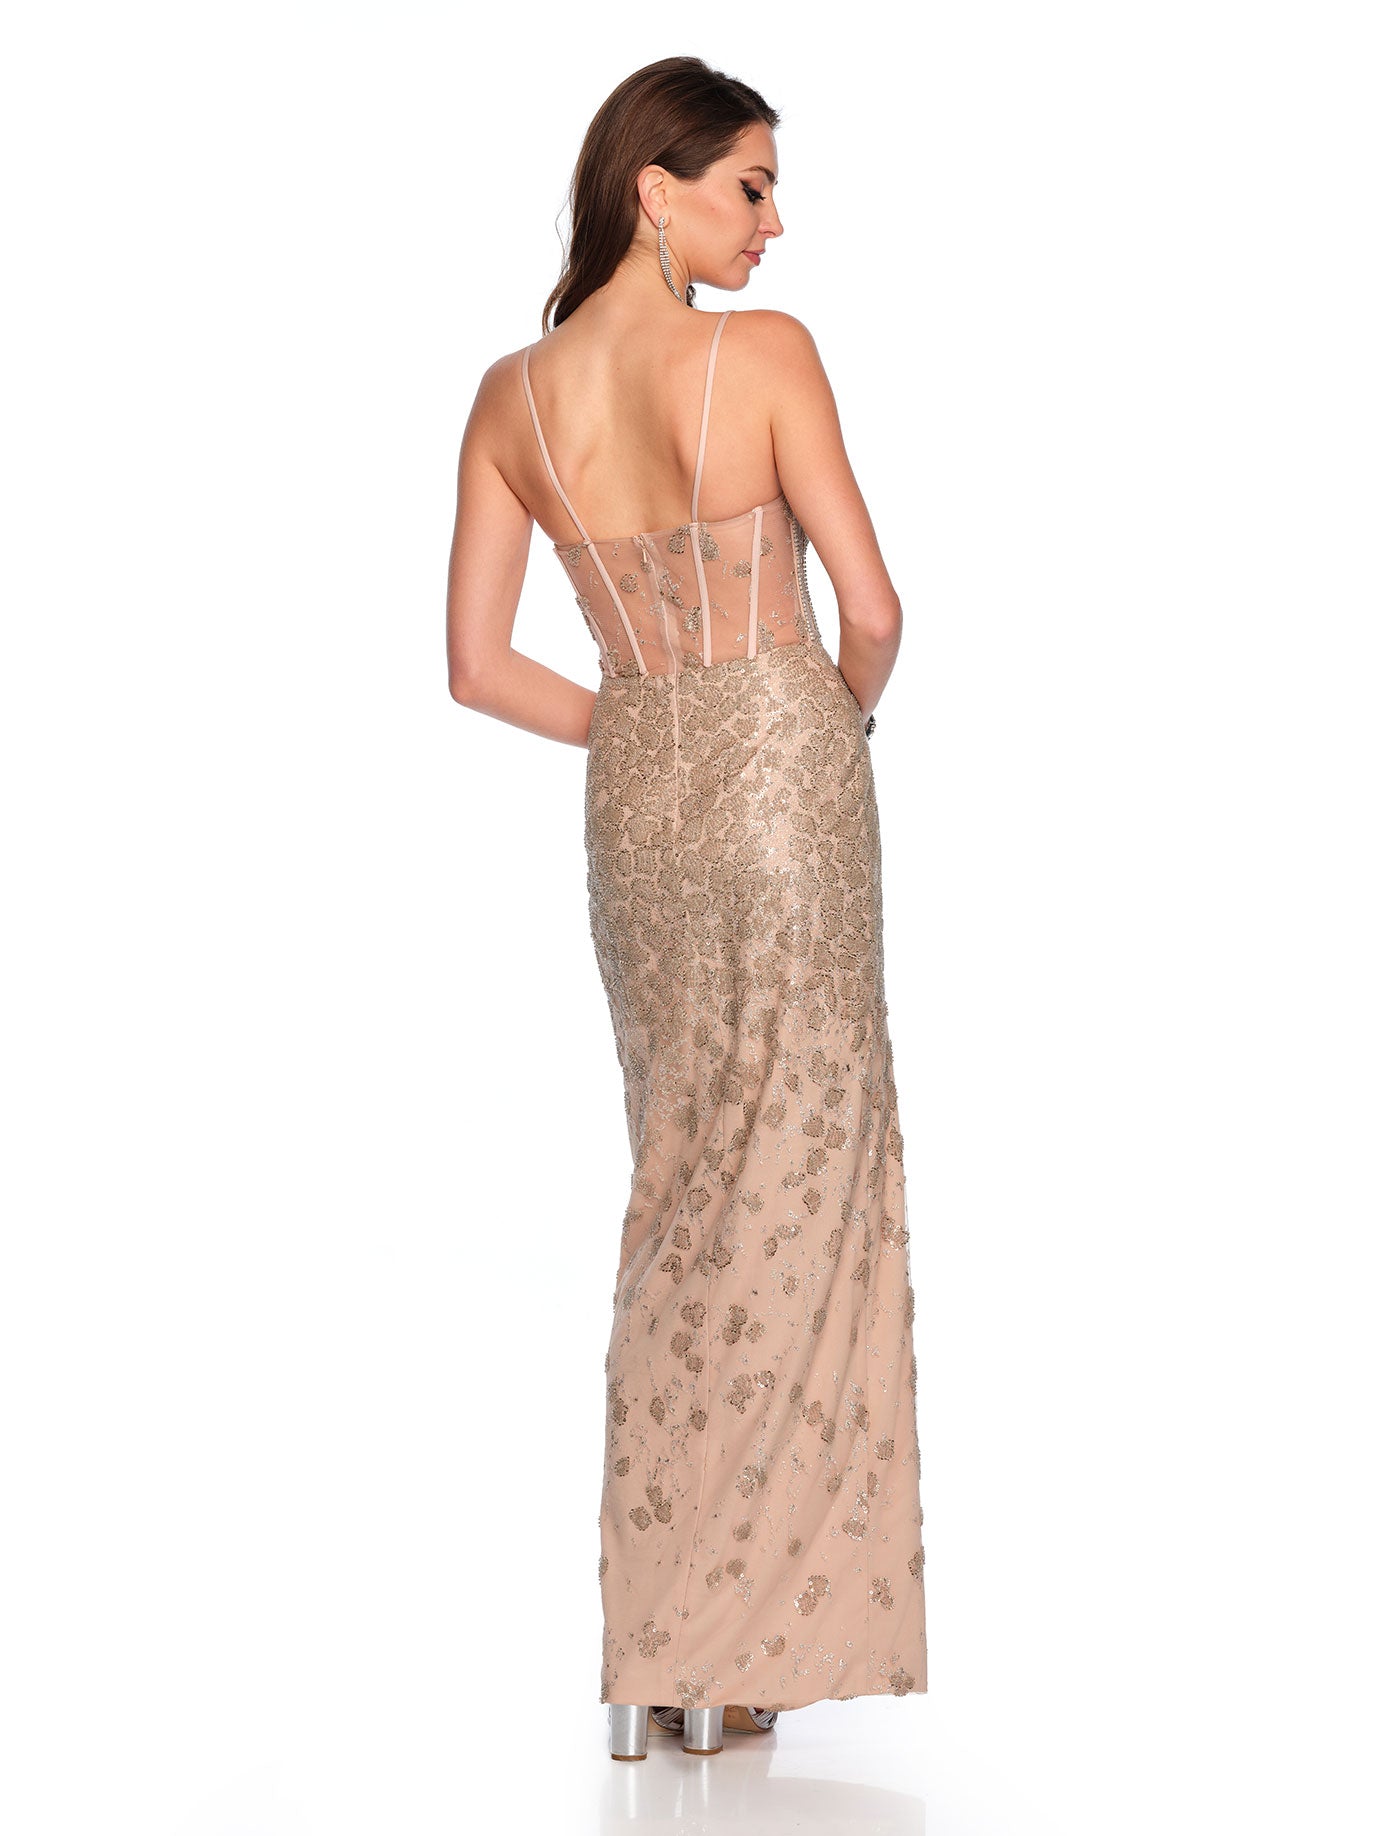 BEADED GOWN WITH ILLUSION BODICE